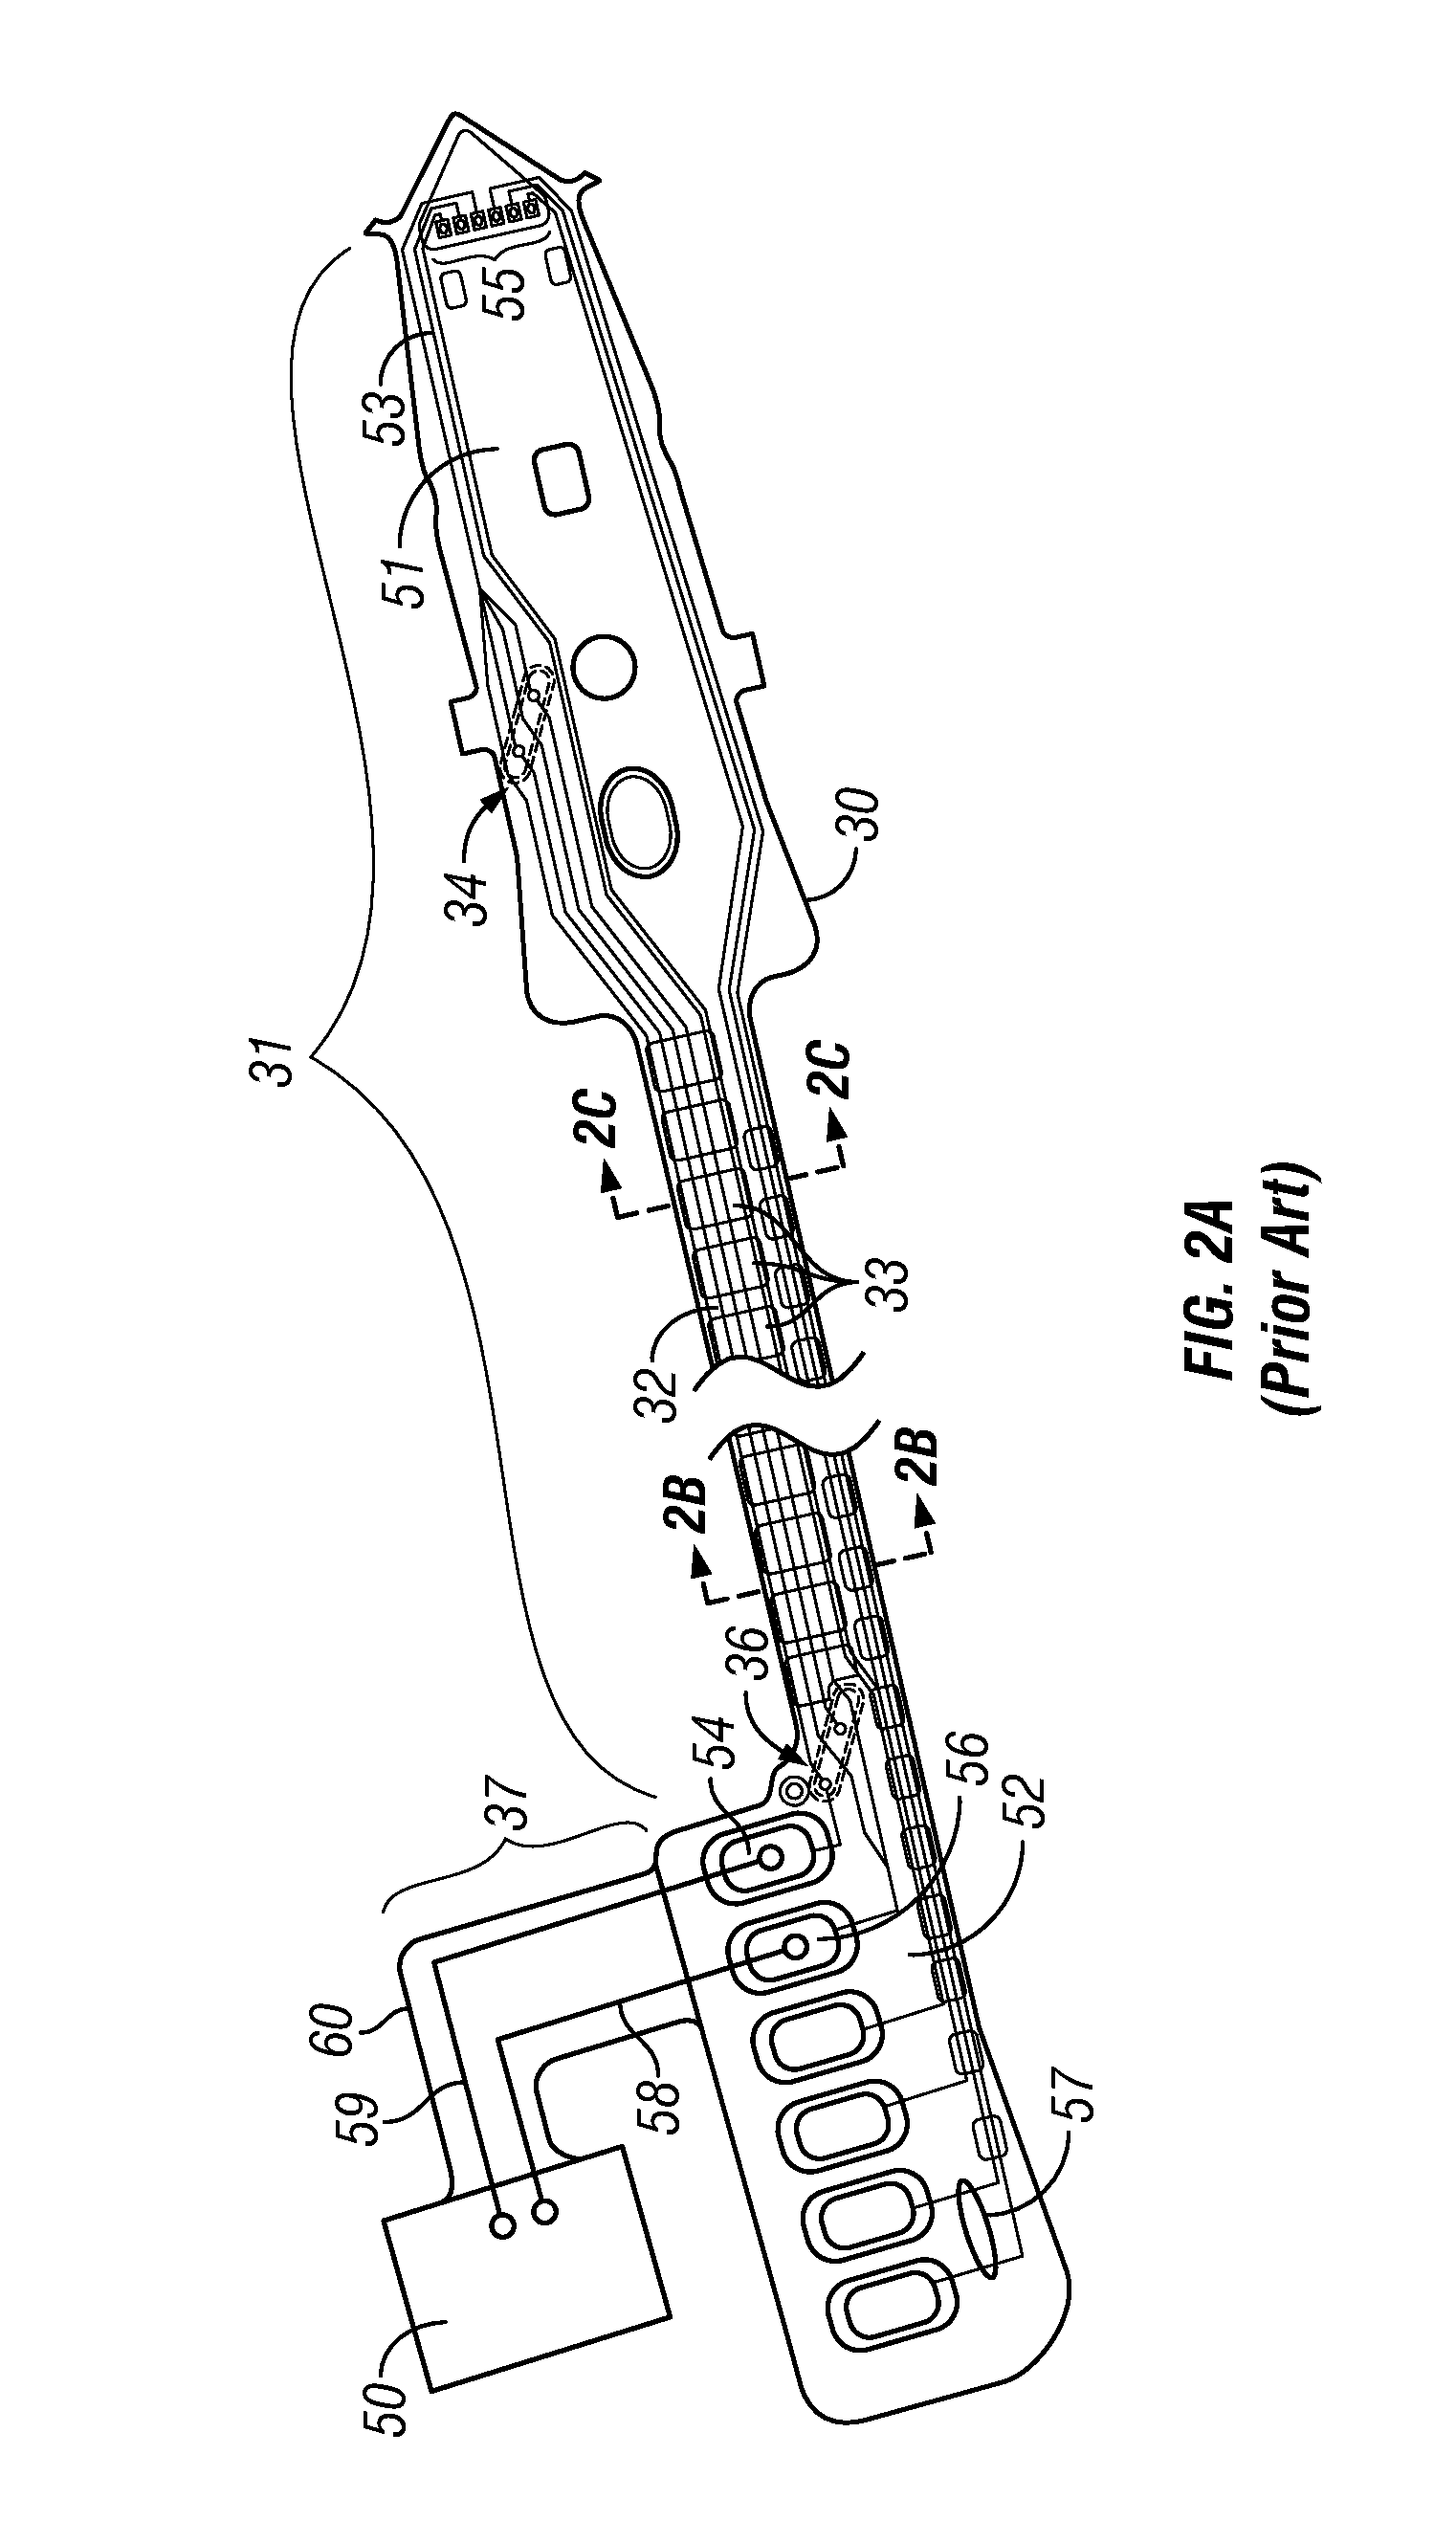 Magnetic recording disk drive with write driver to write head transmission line having non-uniform sections for optimal write current pulse overshoot